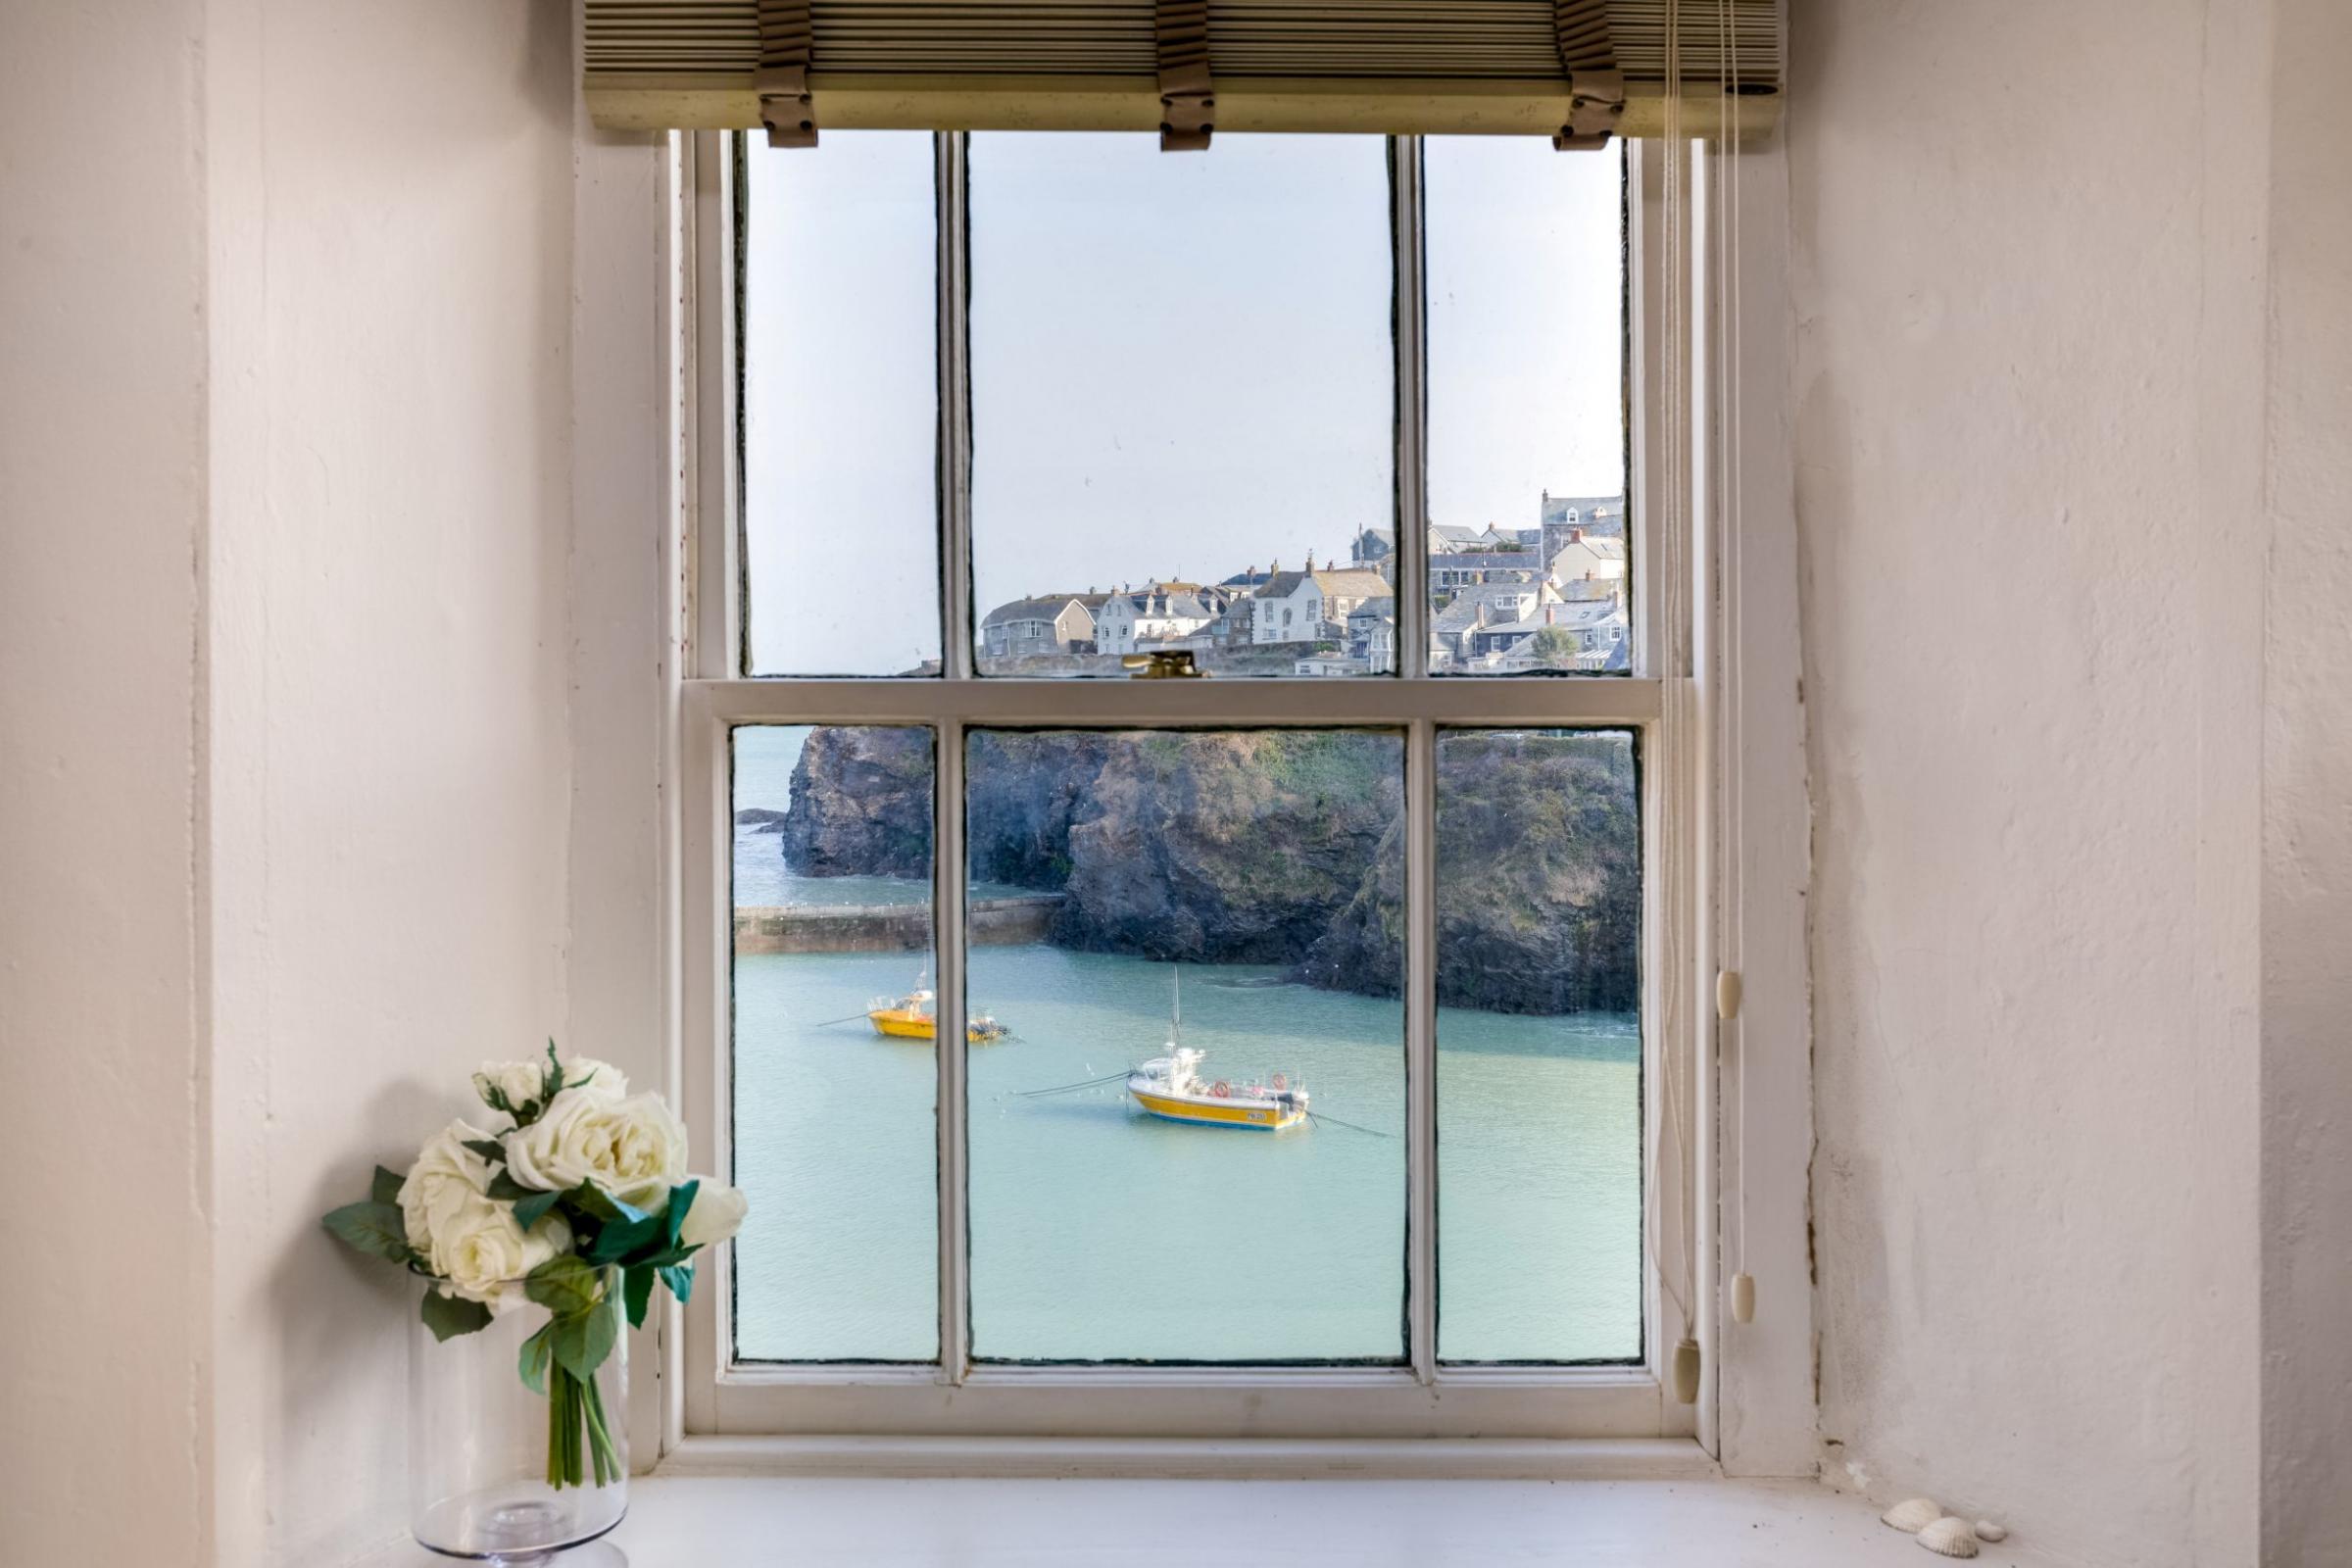 The view of Port Isaac from one of the windows Picture: JB Estates / SWNS